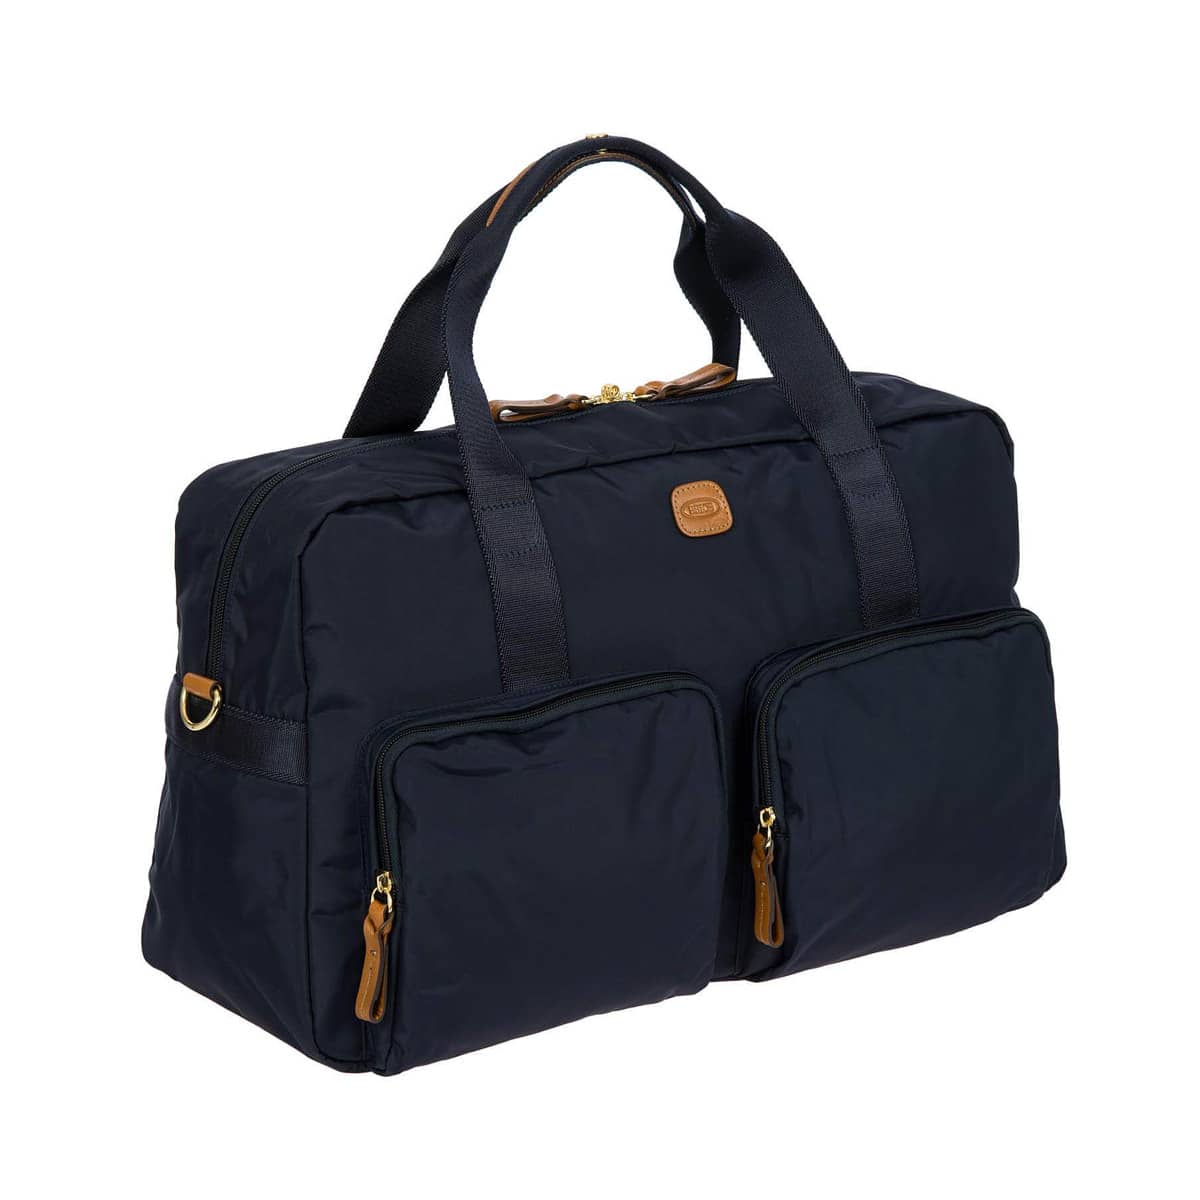 Duffel Bag With Pockets